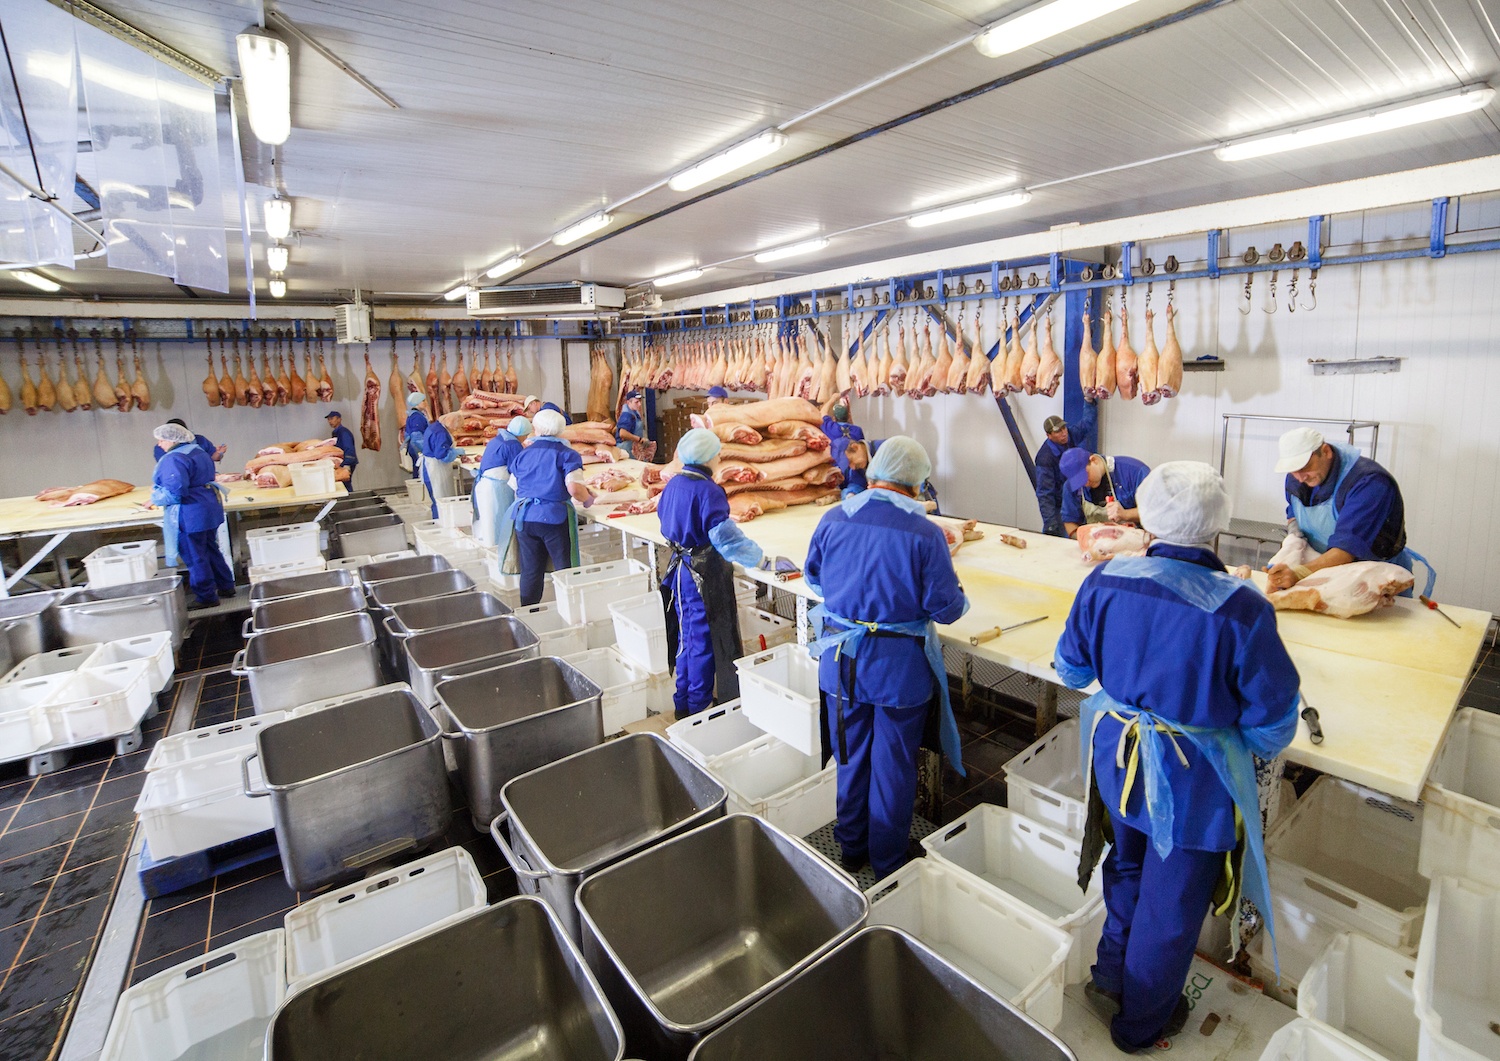 Cutting meat in slaughterhouse. Butcher cutting pork at the meat manufacturing. December 2020